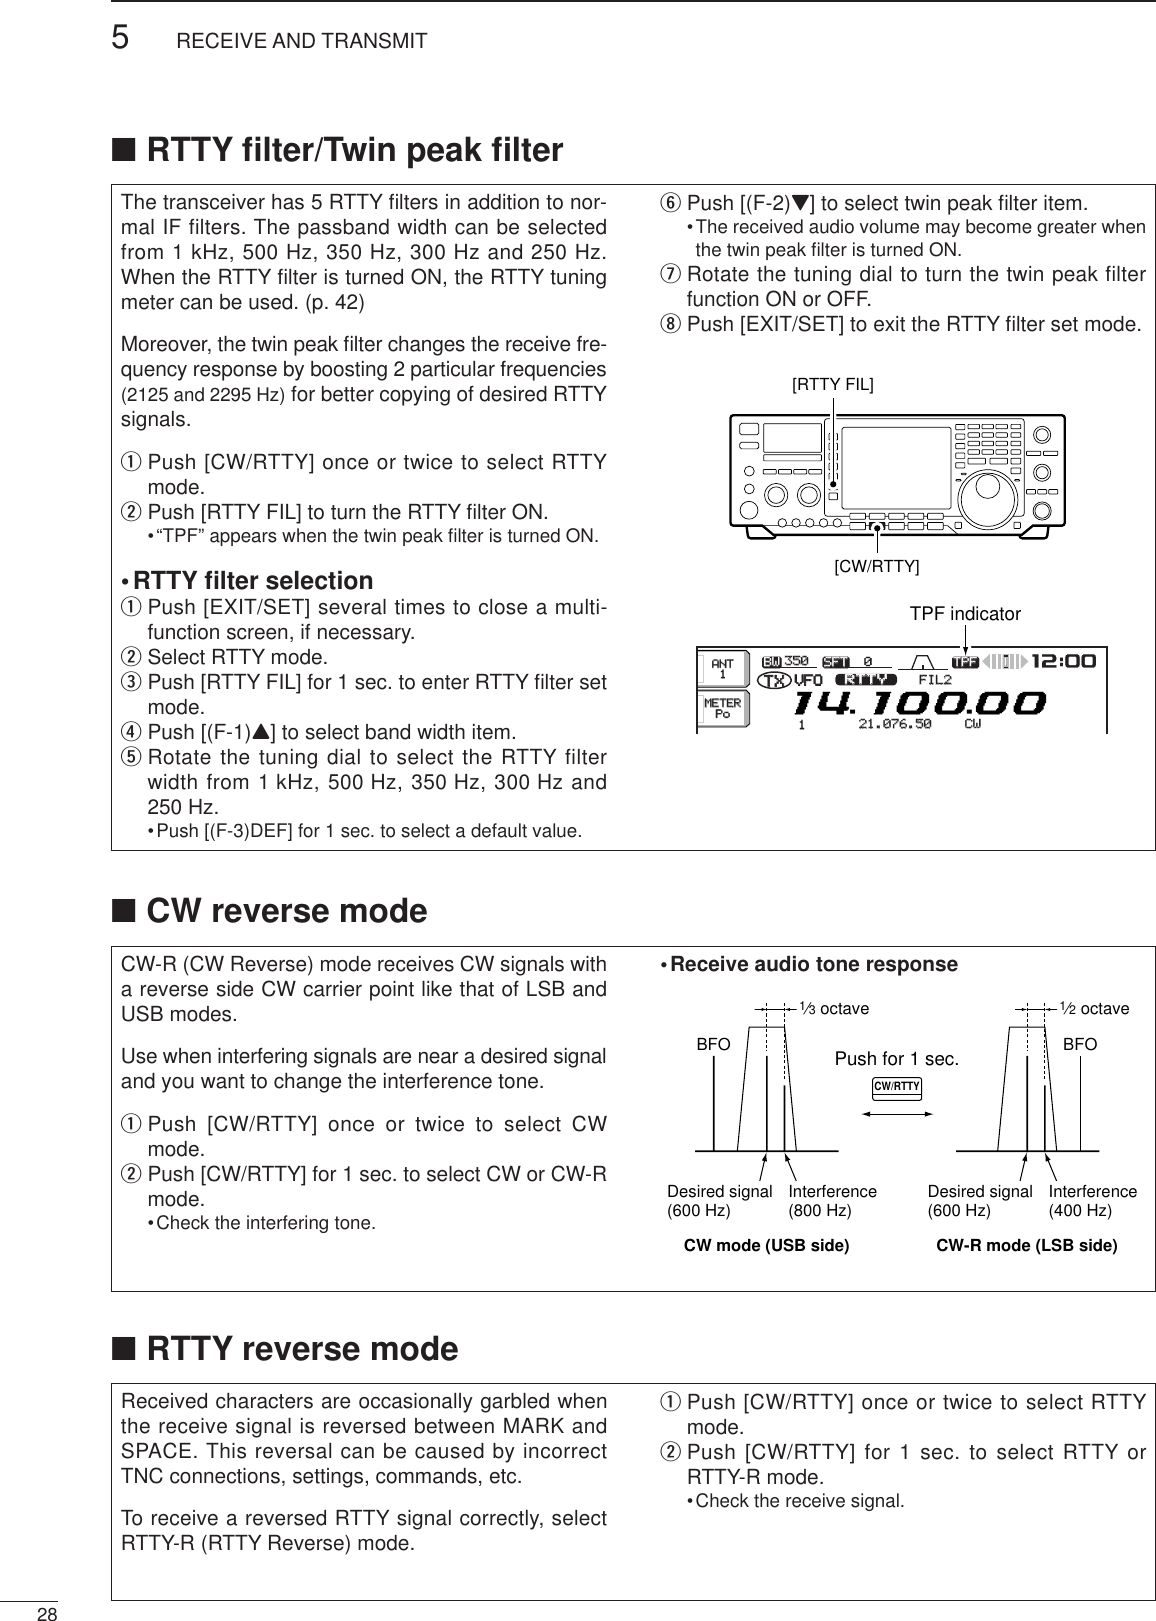 285RECEIVE AND TRANSMITThe transceiver has 5 RTTY ﬁlters in addition to nor-mal IF filters. The passband width can be selectedfrom 1 kHz, 500 Hz, 350 Hz, 300 Hz and 250 Hz.When the RTTY ﬁlter is turned ON, the RTTY tuningmeter can be used. (p. 42)Moreover, the twin peak ﬁlter changes the receive fre-quency response by boosting 2 particular frequencies(2125 and 2295 Hz) for better copying of desired RTTYsignals.qPush [CW/RTTY] once or twice to select RTTYmode.wPush [RTTY FIL] to turn the RTTY ﬁlter ON.•“TPF” appears when the twin peak ﬁlter is turned ON.•RTTY ﬁlter selectionqPush [EXIT/SET] several times to close a multi-function screen, if necessary.wSelect RTTY mode.ePush [RTTY FIL] for 1 sec. to enter RTTY ﬁlter setmode.rPush [(F-1)Y] to select band width item.tRotate the tuning dial to select the RTTY filterwidth from 1 kHz, 500 Hz, 350 Hz, 300 Hz and250 Hz.•Push [(F-3)DEF] for 1 sec. to select a default value.yPush [(F-2)Z] to select twin peak ﬁlter item.•The received audio volume may become greater whenthe twin peak ﬁlter is turned ON.uRotate the tuning dial to turn the twin peak filterfunction ON or OFF.iPush [EXIT/SET] to exit the RTTY ﬁlter set mode.BWBW 350350 SFTSFT 0VFOVFOFIL2FIL2RTTYRTTYqw:ppTXTX1CWCWqr.qpp.pp21.076.5021.076.50TPFTPFMETERMETERPoPoANTANT1[RTTY FIL][CW/RTTY]TPF indicator■RTTY reverse modeReceived characters are occasionally garbled whenthe receive signal is reversed between MARK andSPACE. This reversal can be caused by incorrectTNC connections, settings, commands, etc.To receive a reversed RTTY signal correctly, selectRTTY-R (RTTY Reverse) mode.qPush [CW/RTTY] once or twice to select RTTYmode.wPush [CW/RTTY] for 1 sec. to select RTTY orRTTY-R mode.•Check the receive signal.■RTTY ﬁlter/Twin peak ﬁlter■CW reverse modeCW-R (CW Reverse) mode receives CW signals witha reverse side CW carrier point like that of LSB andUSB modes.Use when interfering signals are near a desired signaland you want to change the interference tone.qPush [CW/RTTY] once or twice to select CWmode.wPush [CW/RTTY] for 1 sec. to select CW or CW-Rmode.•Check the interfering tone.•Receive audio tone responseBFO1⁄3 octavePush for 1 sec.Desired signal(600 Hz)CW mode (USB side)Interference(800 Hz)BFO1⁄2 octaveDesired signal(600 Hz)CW-R mode (LSB side)Interference(400 Hz)CW/RTTY